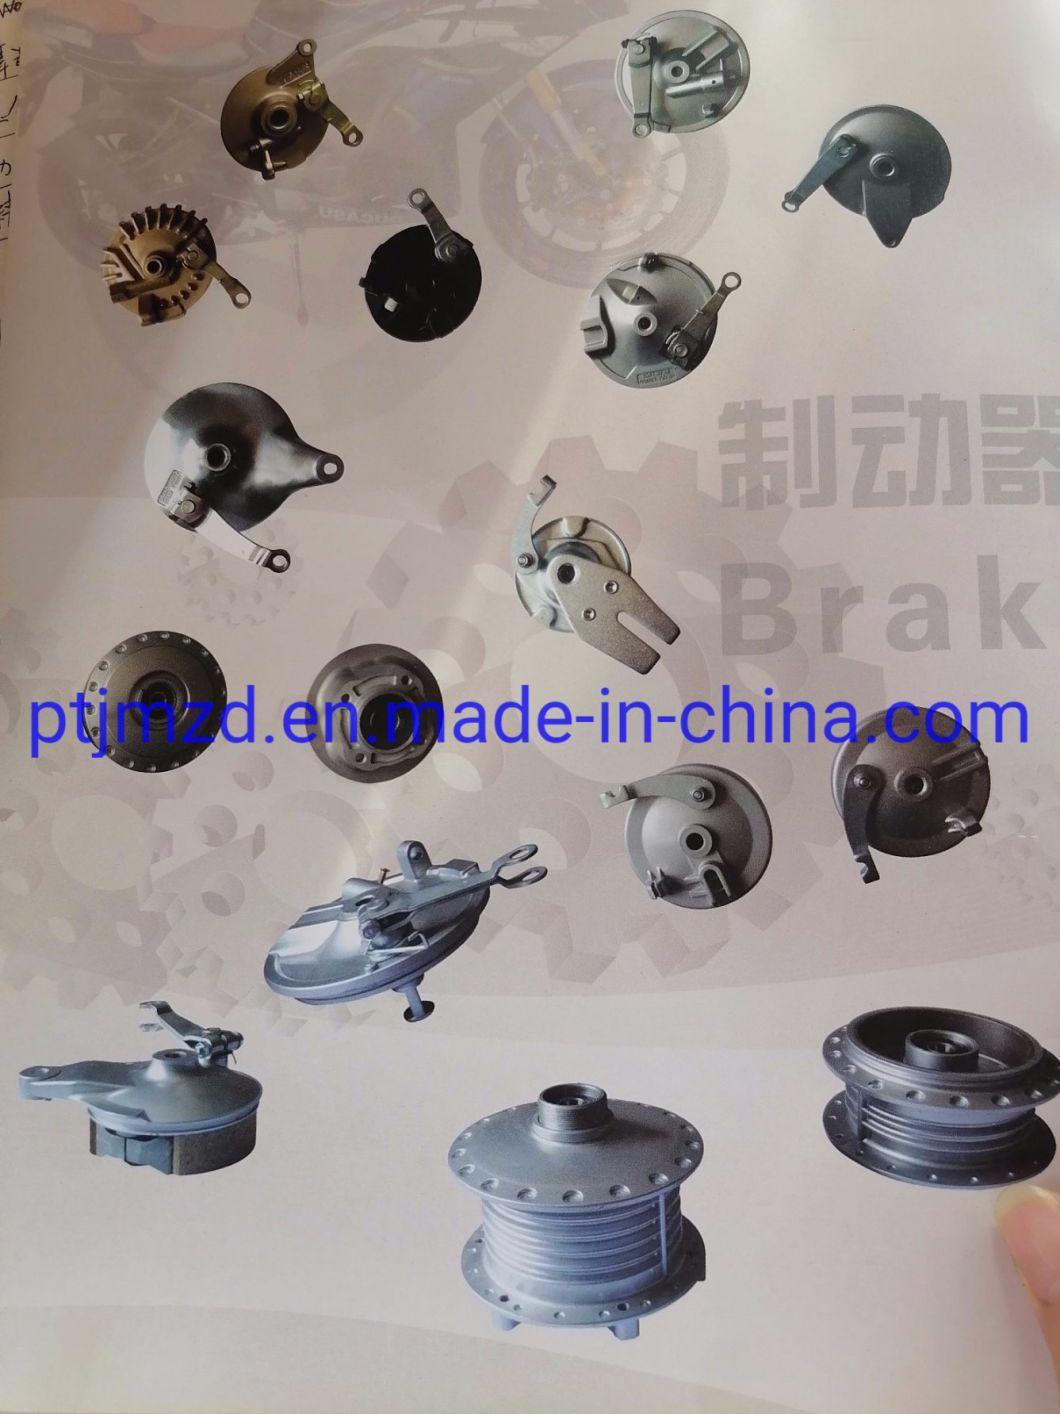 Motorcycle Brake Shoes. Motorcycle Parts, Auto Spare Part-Auto Spare Part-Tb50